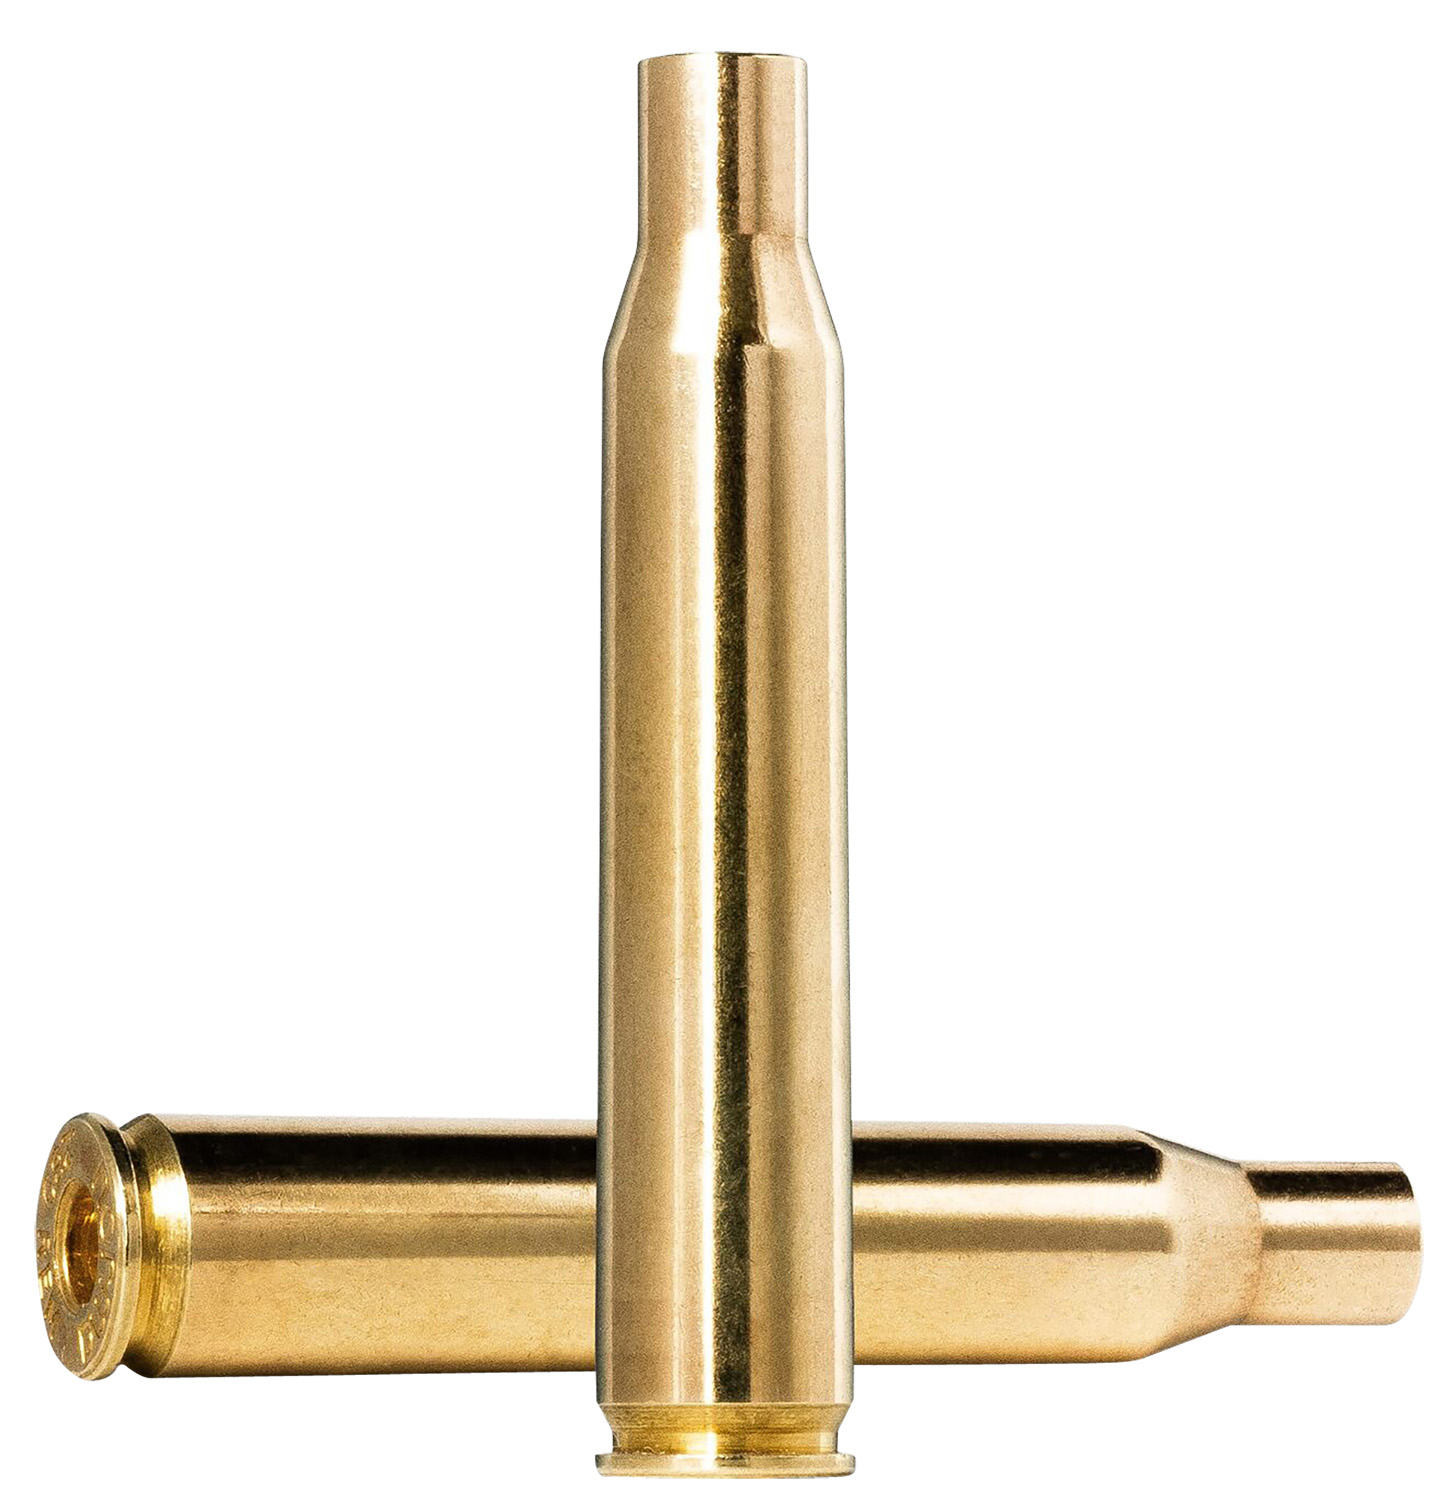 Norma Ammunition 20276232 Dedicated Components Reloading 308 Win Rifle Brass